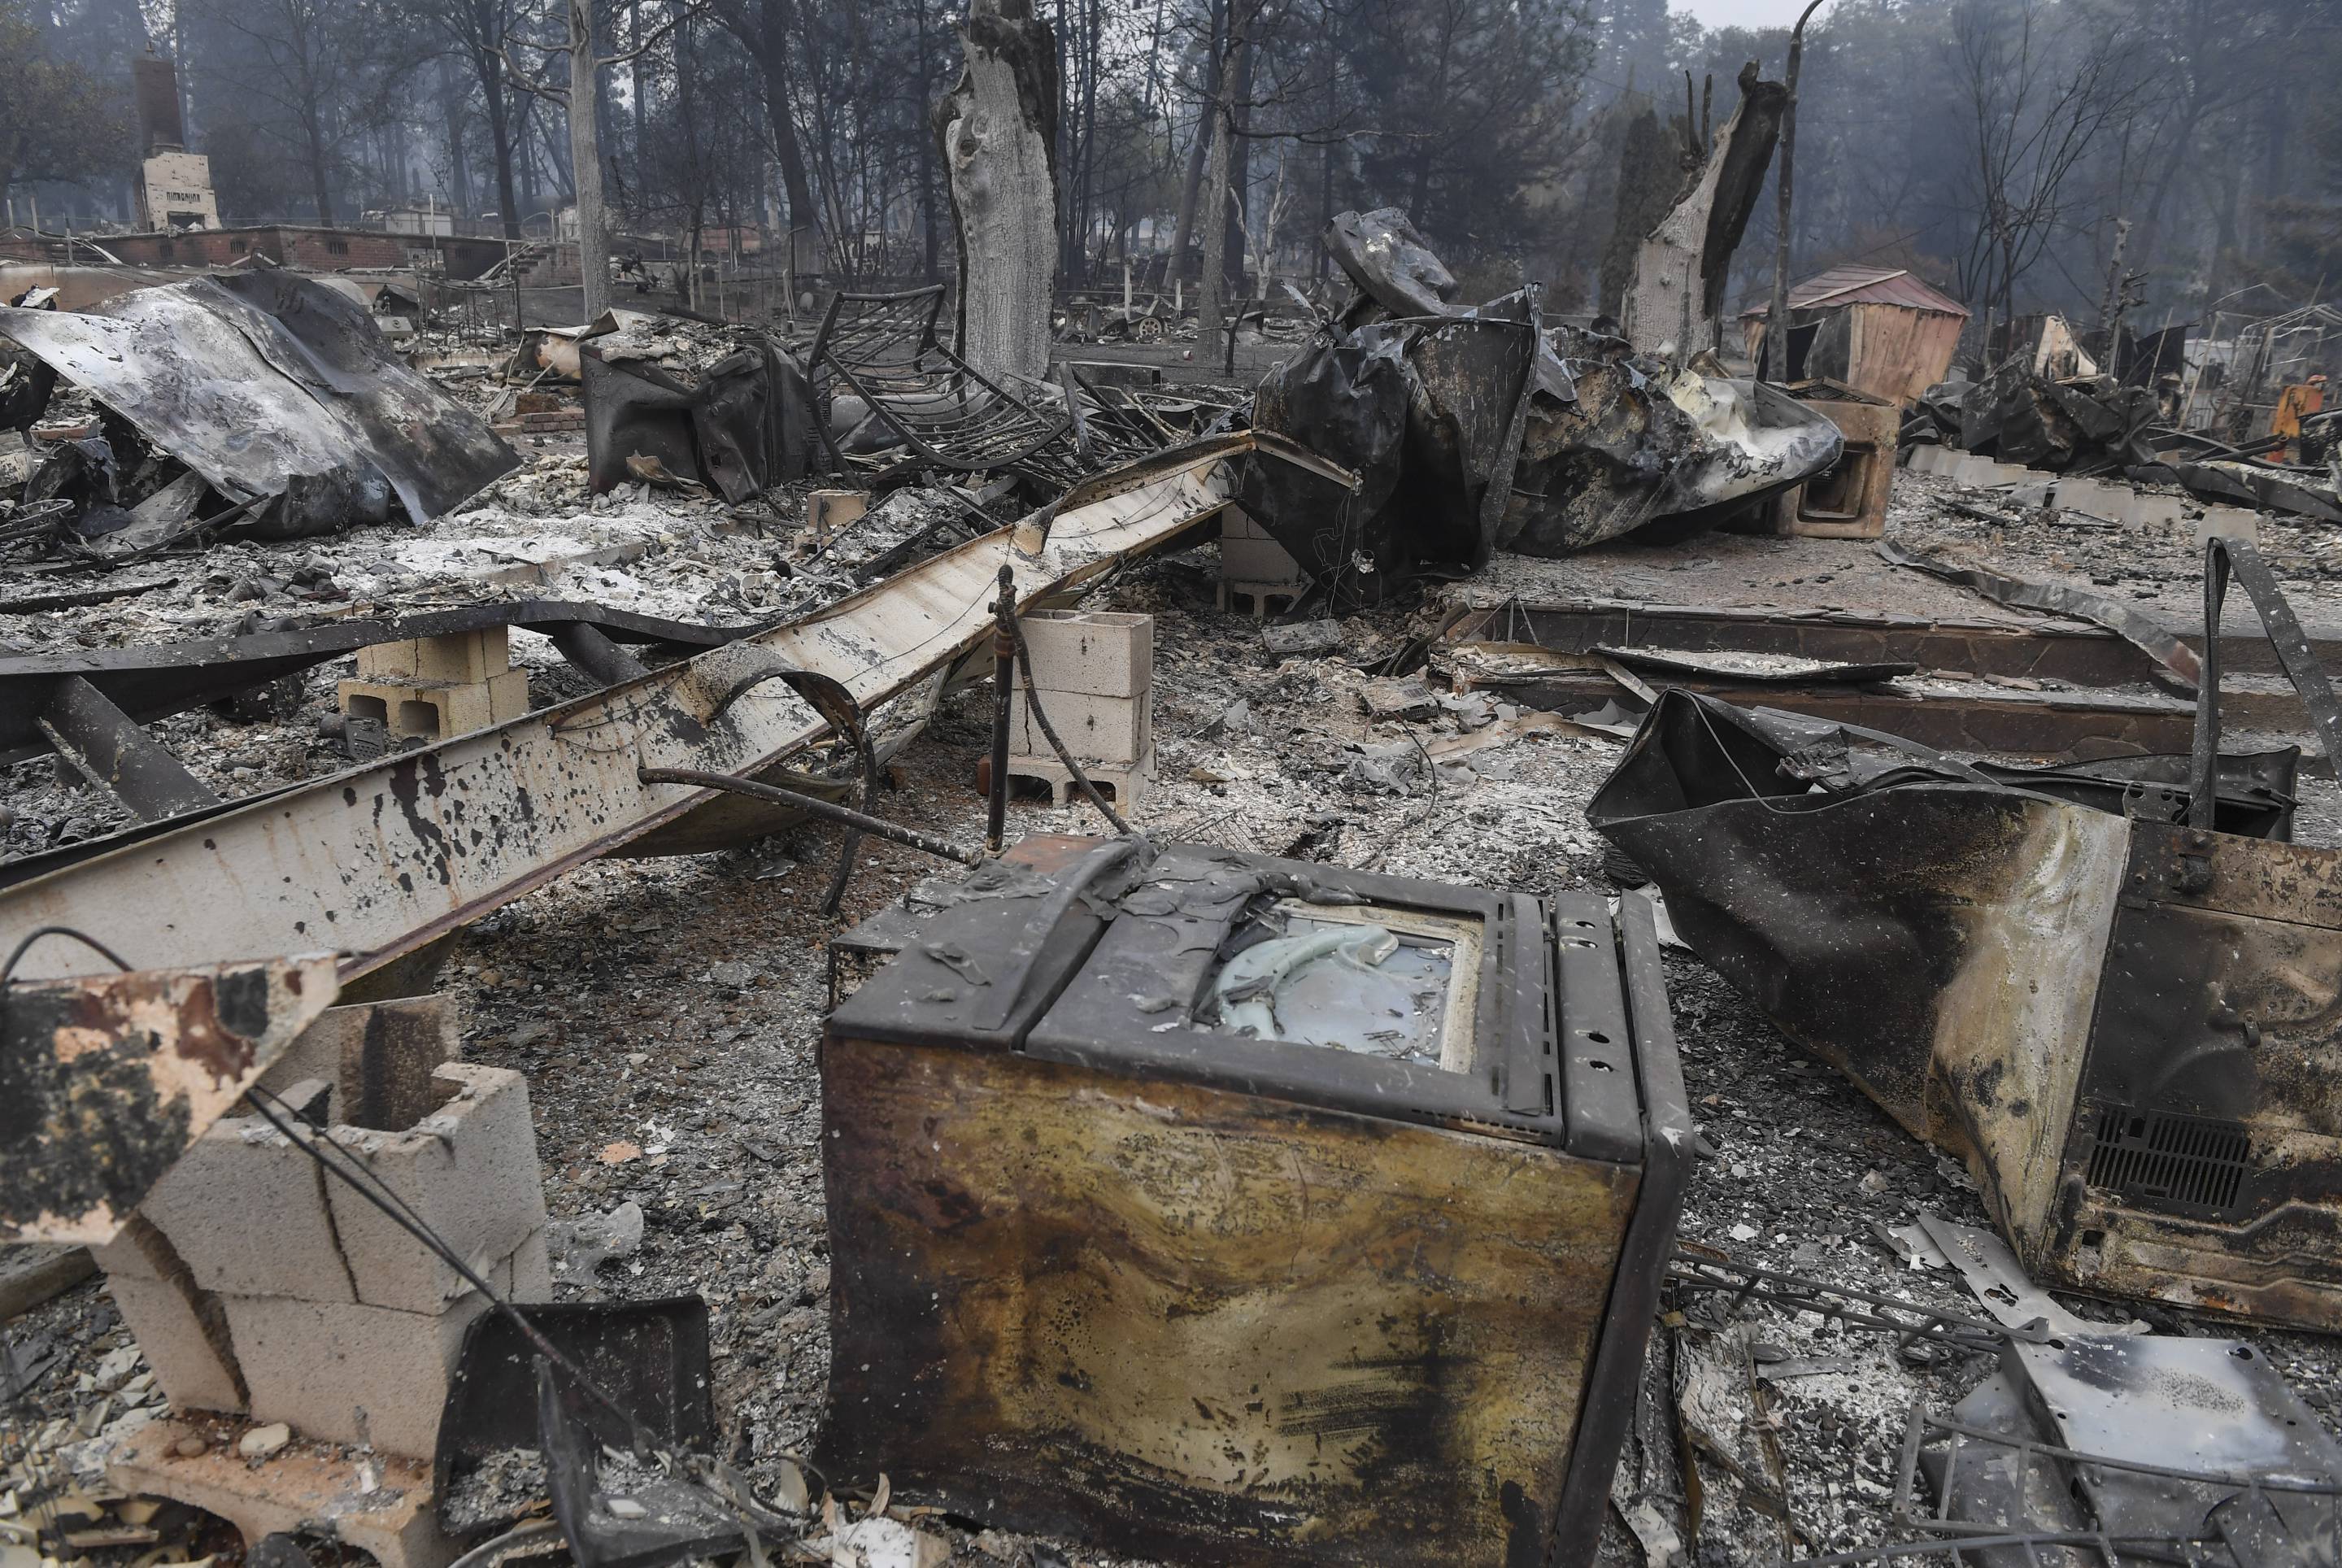 Trump to Survey ‘Incredible’ Fire Damage in California Following Criticism